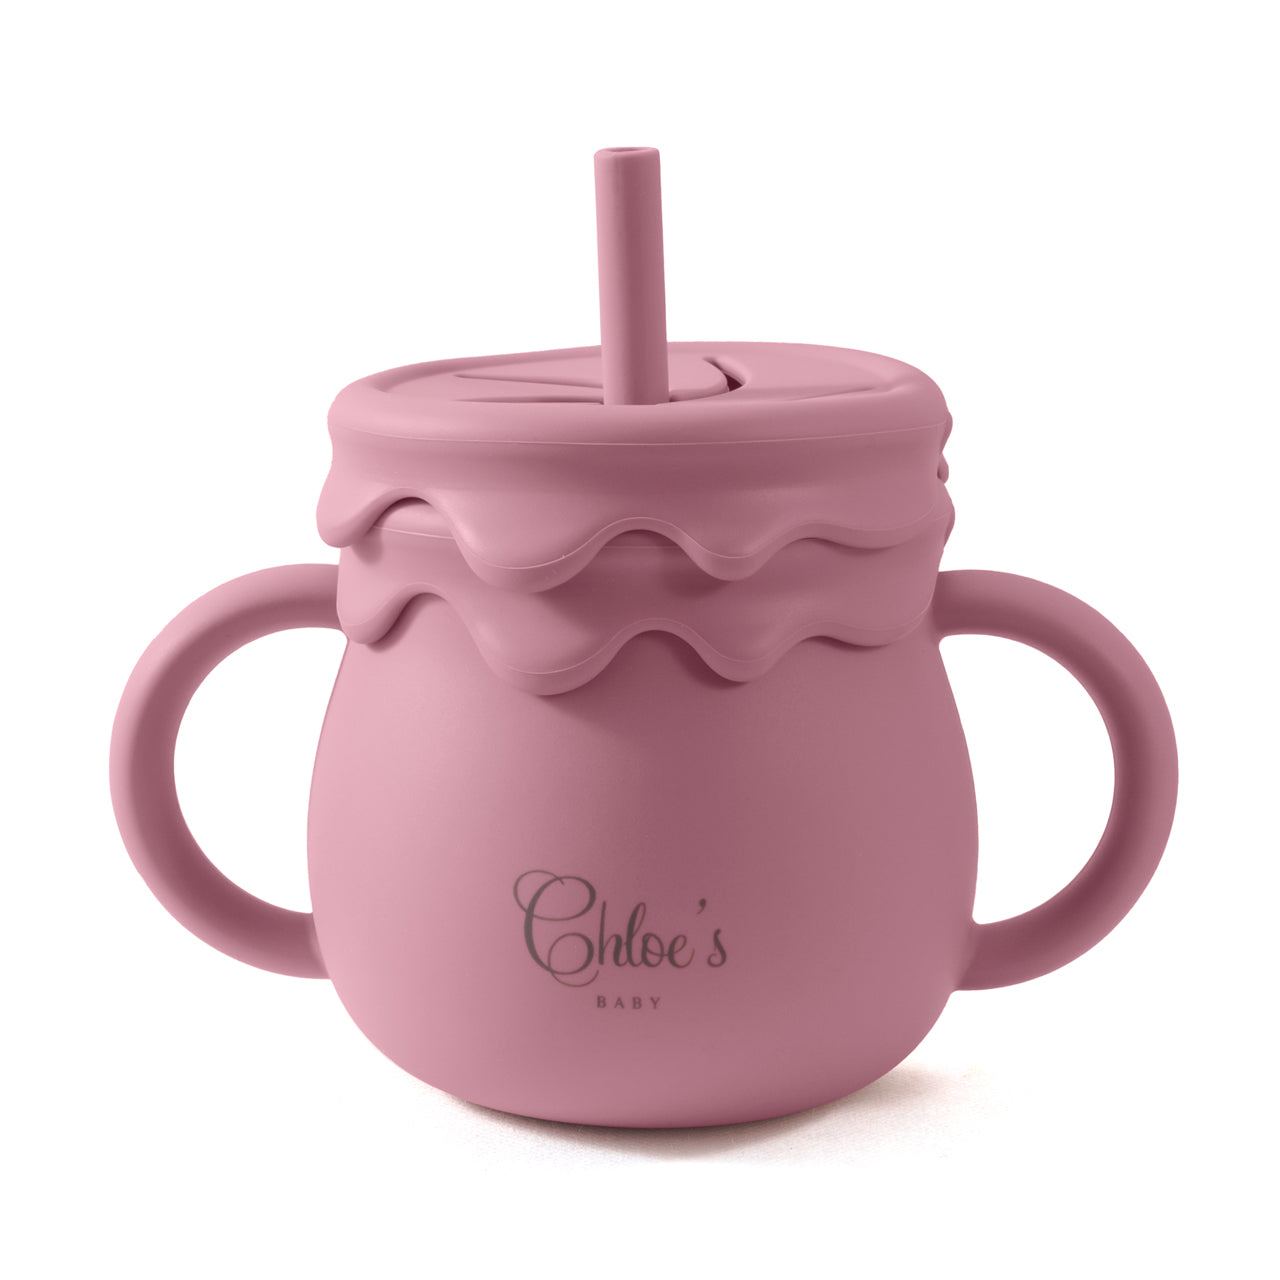 Chloe's Baby Silicone Bowl with Lid – Chloe's Baby Store